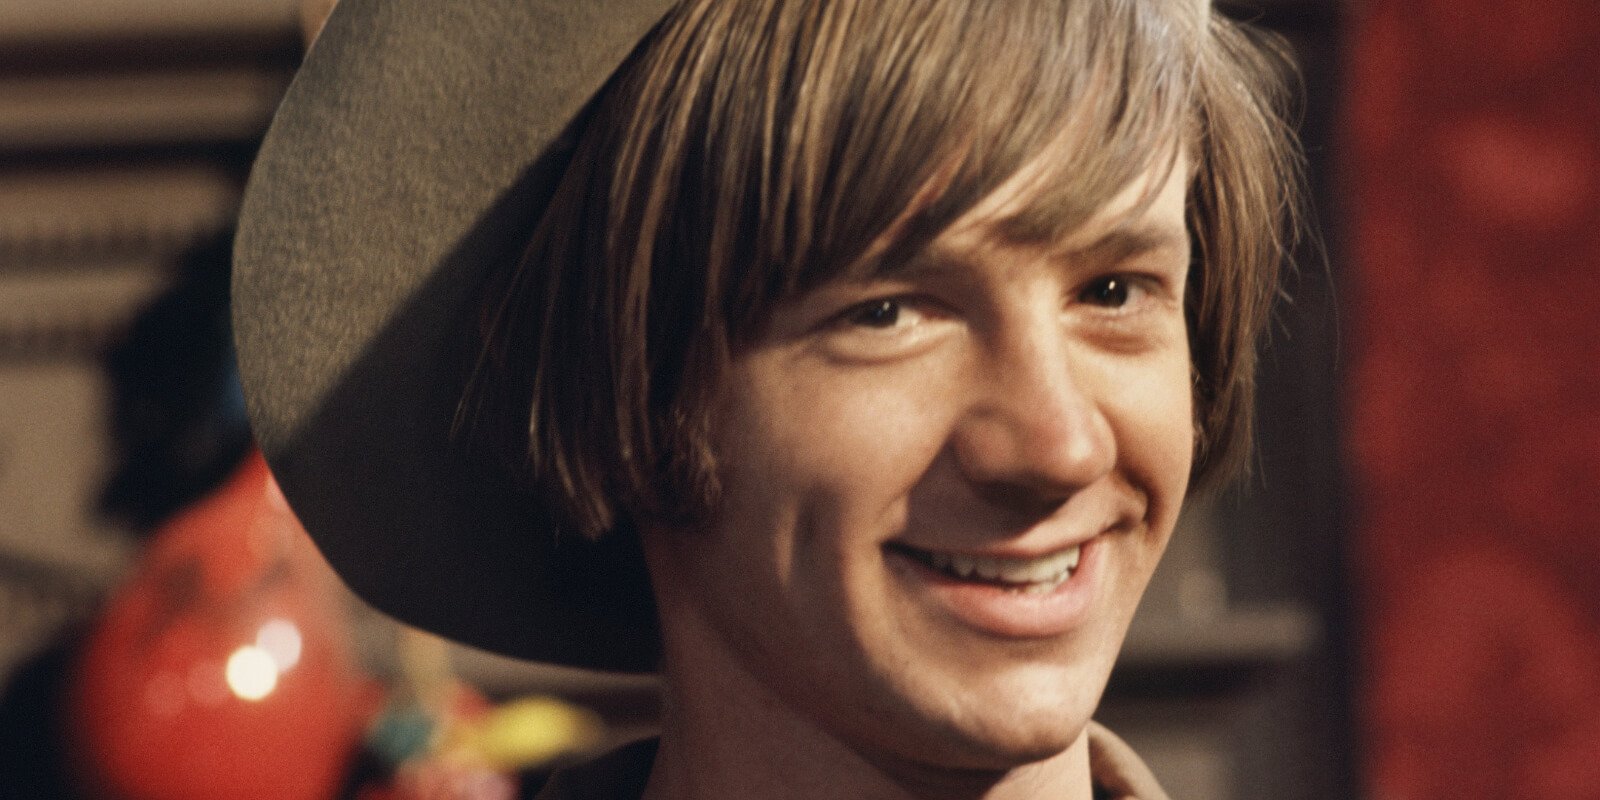 Peter Tork on the set of the television show The Monkees in June 1967 in Los Angeles, California.